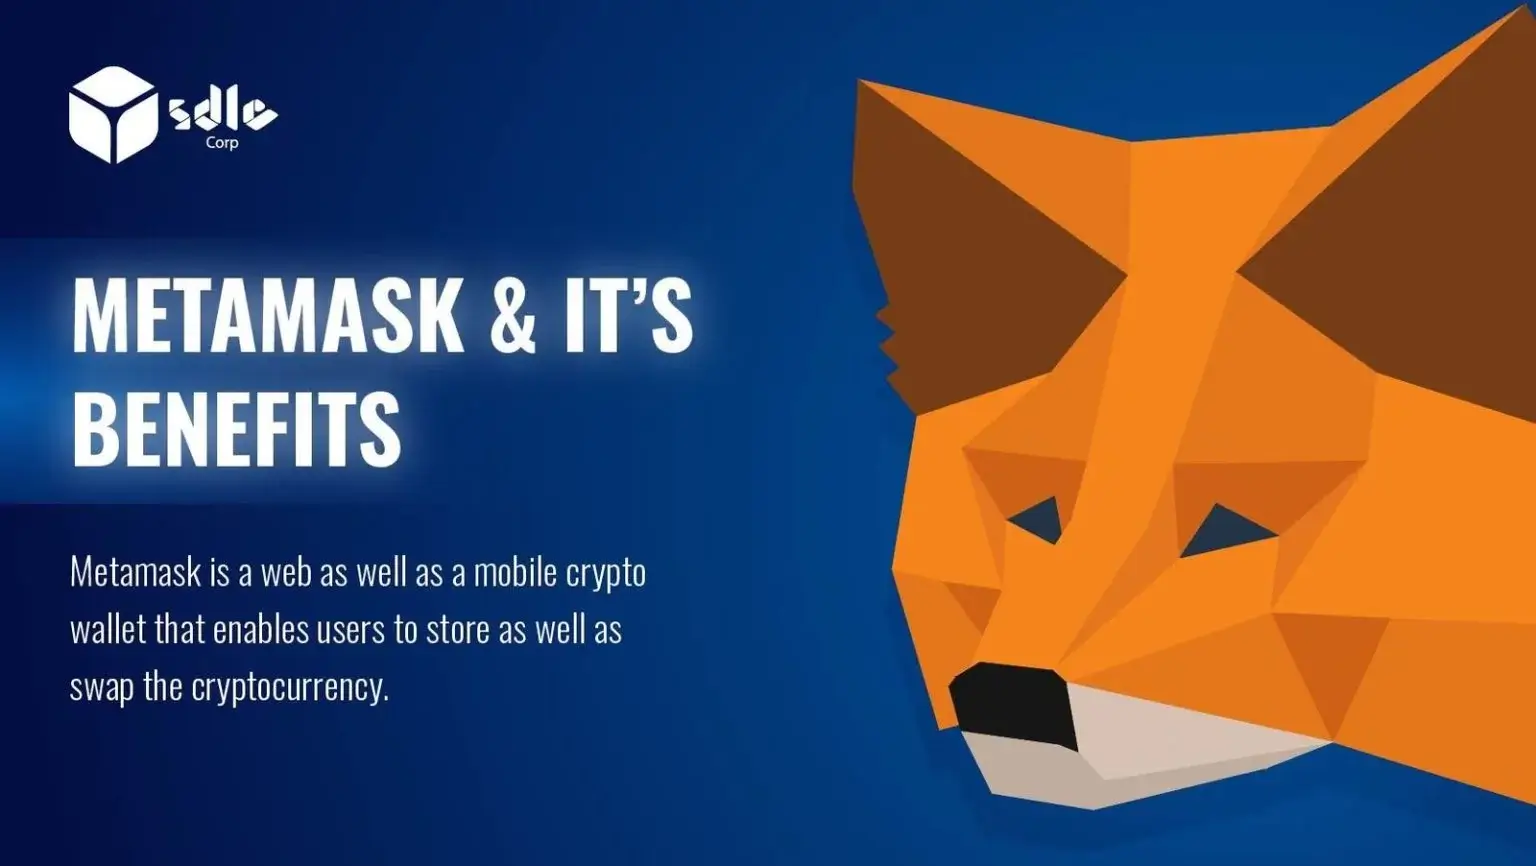 The Benefits of Metamask RPC